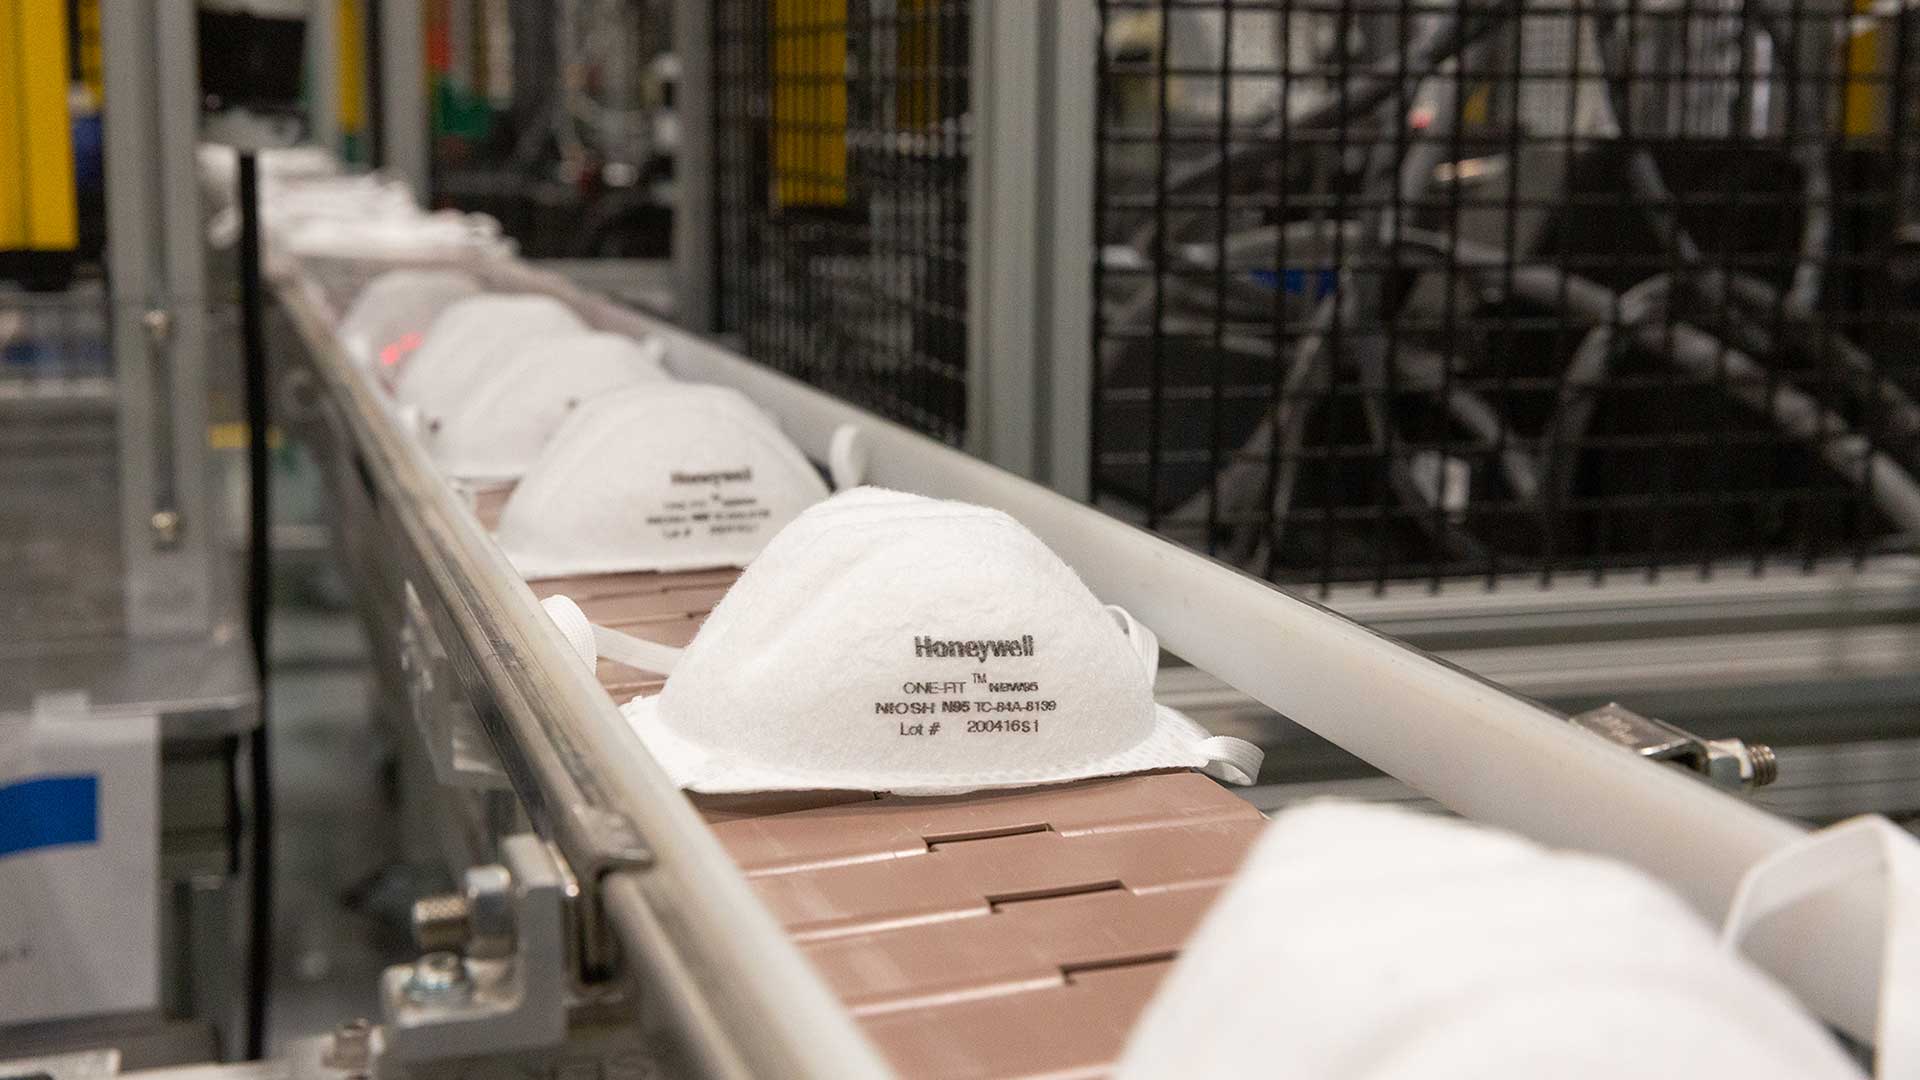 Honeywell has converted some of its plants so that they can produce health care gear like the N95 masks manufactured in Phoenix. President Donald Trump is scheduled to visit the Phoenix facility Tuesday.